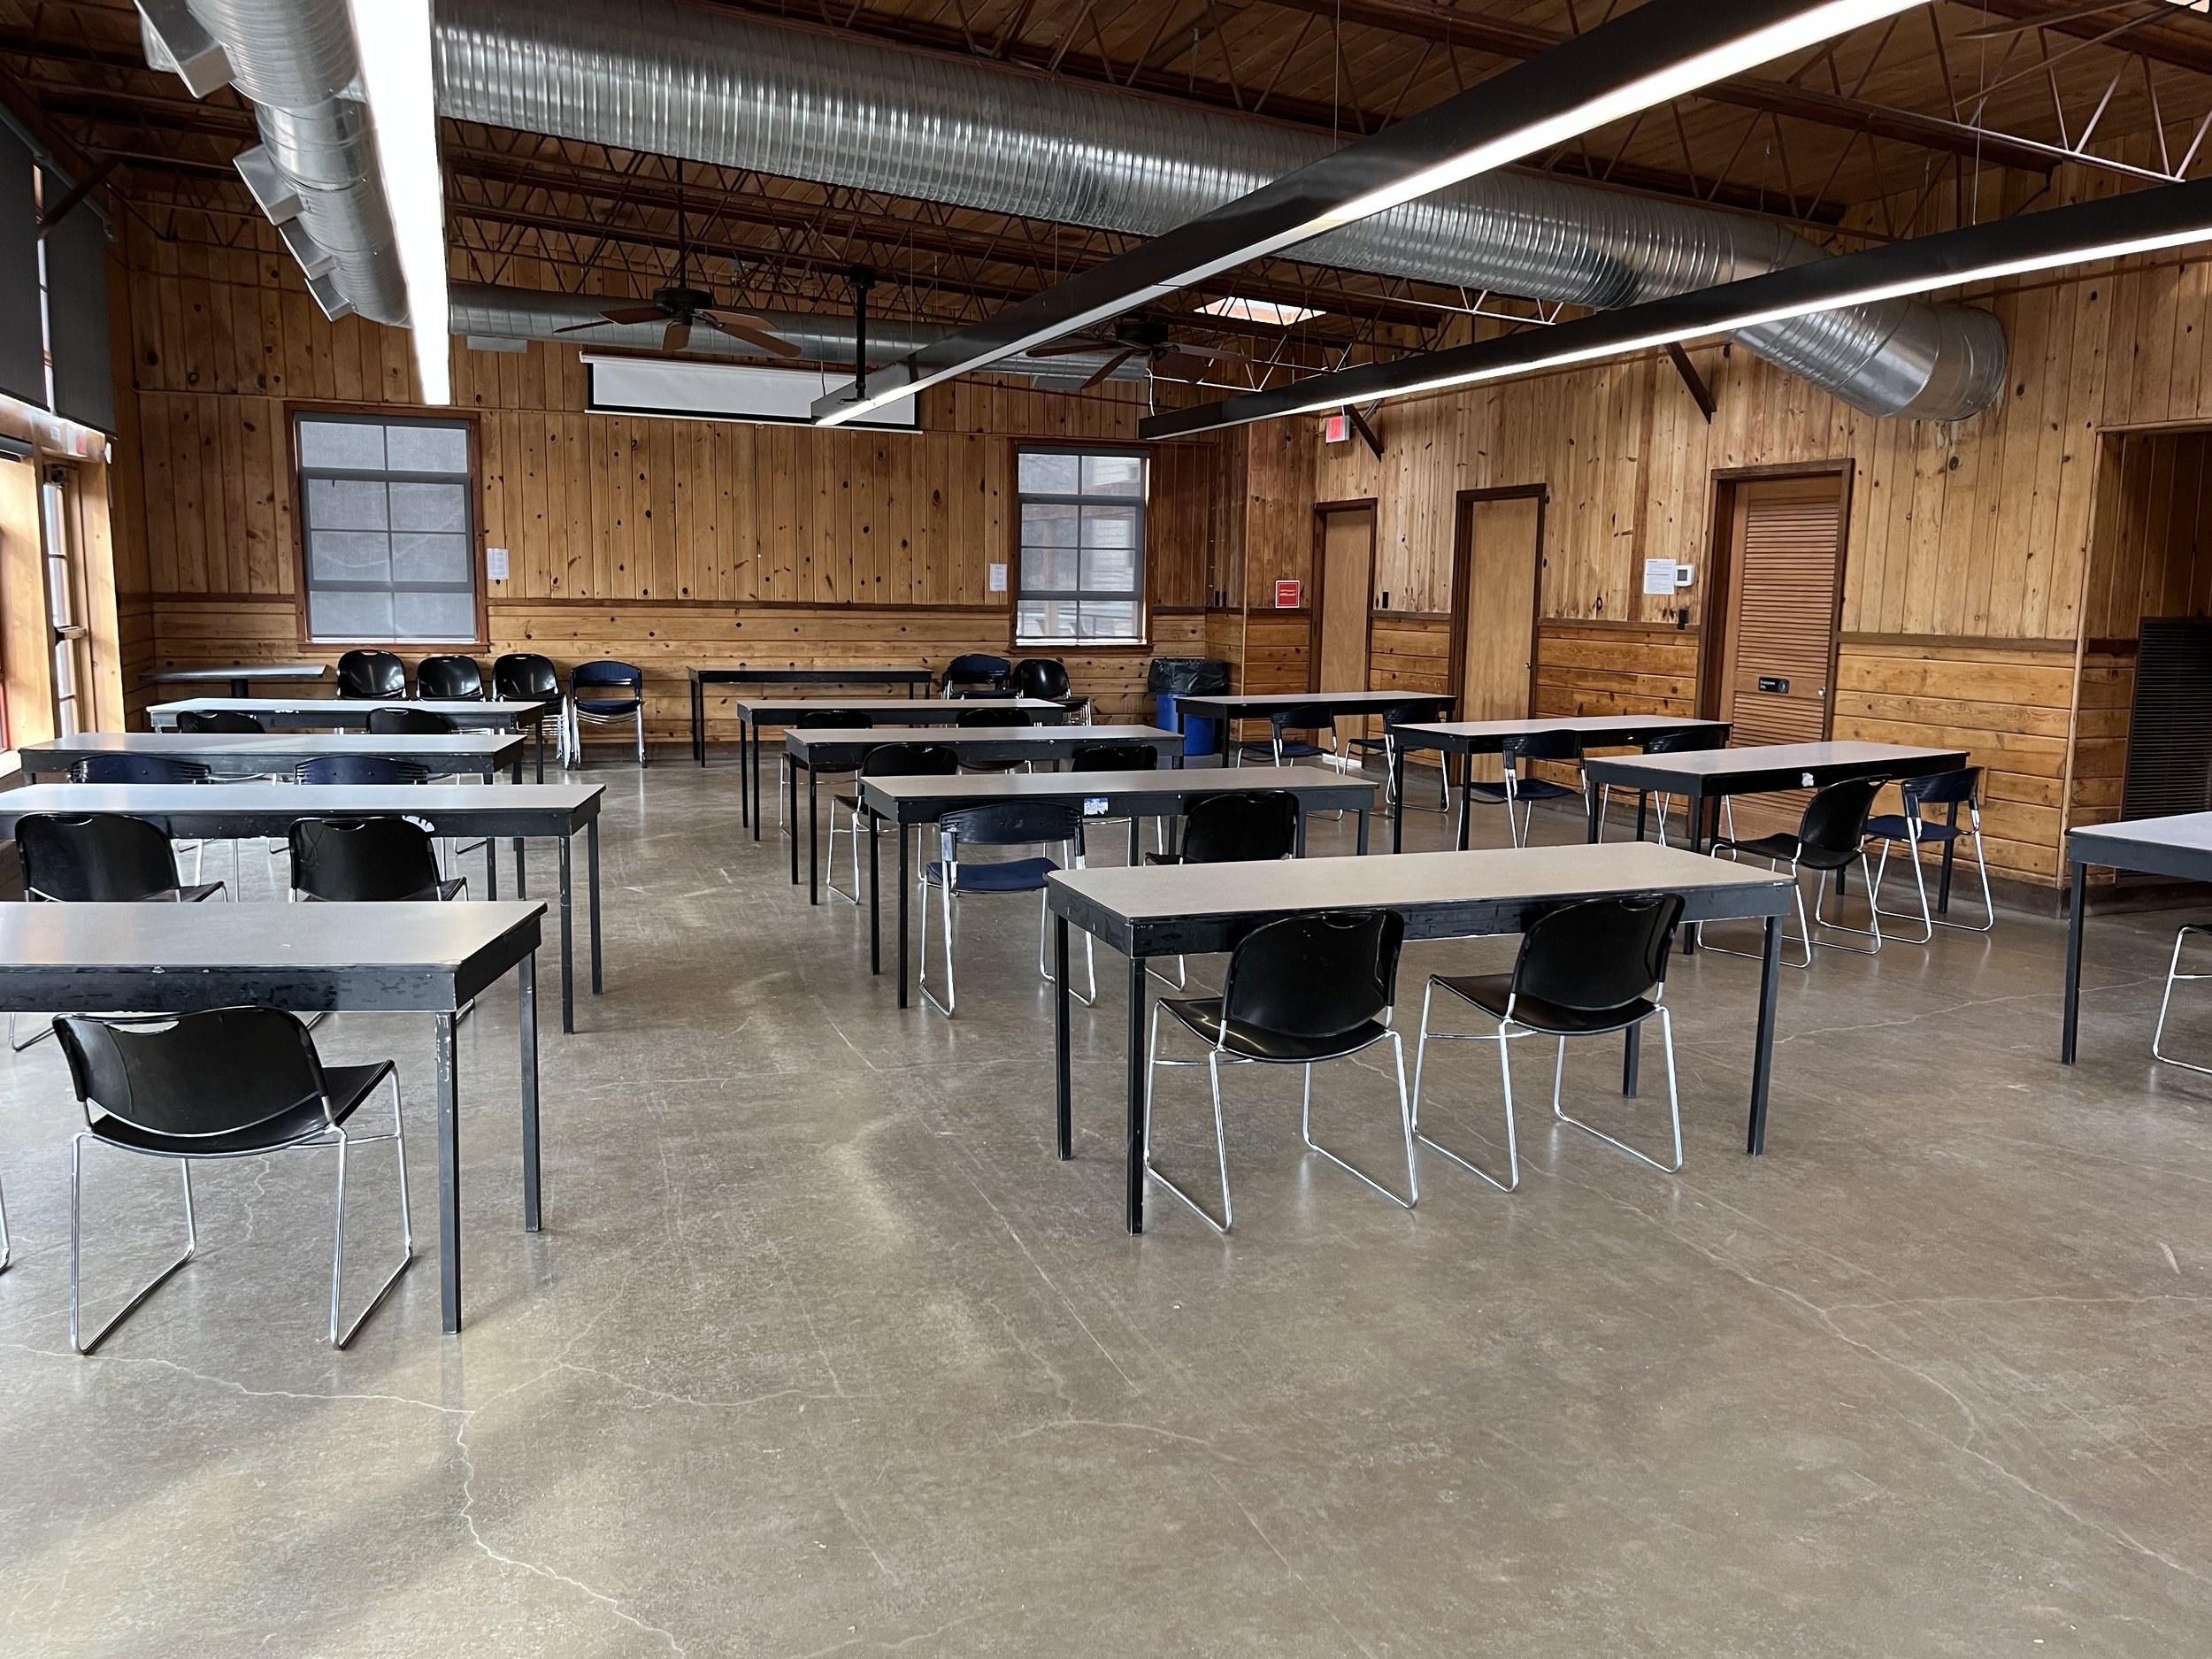 Classroom Style, 24 Chairs